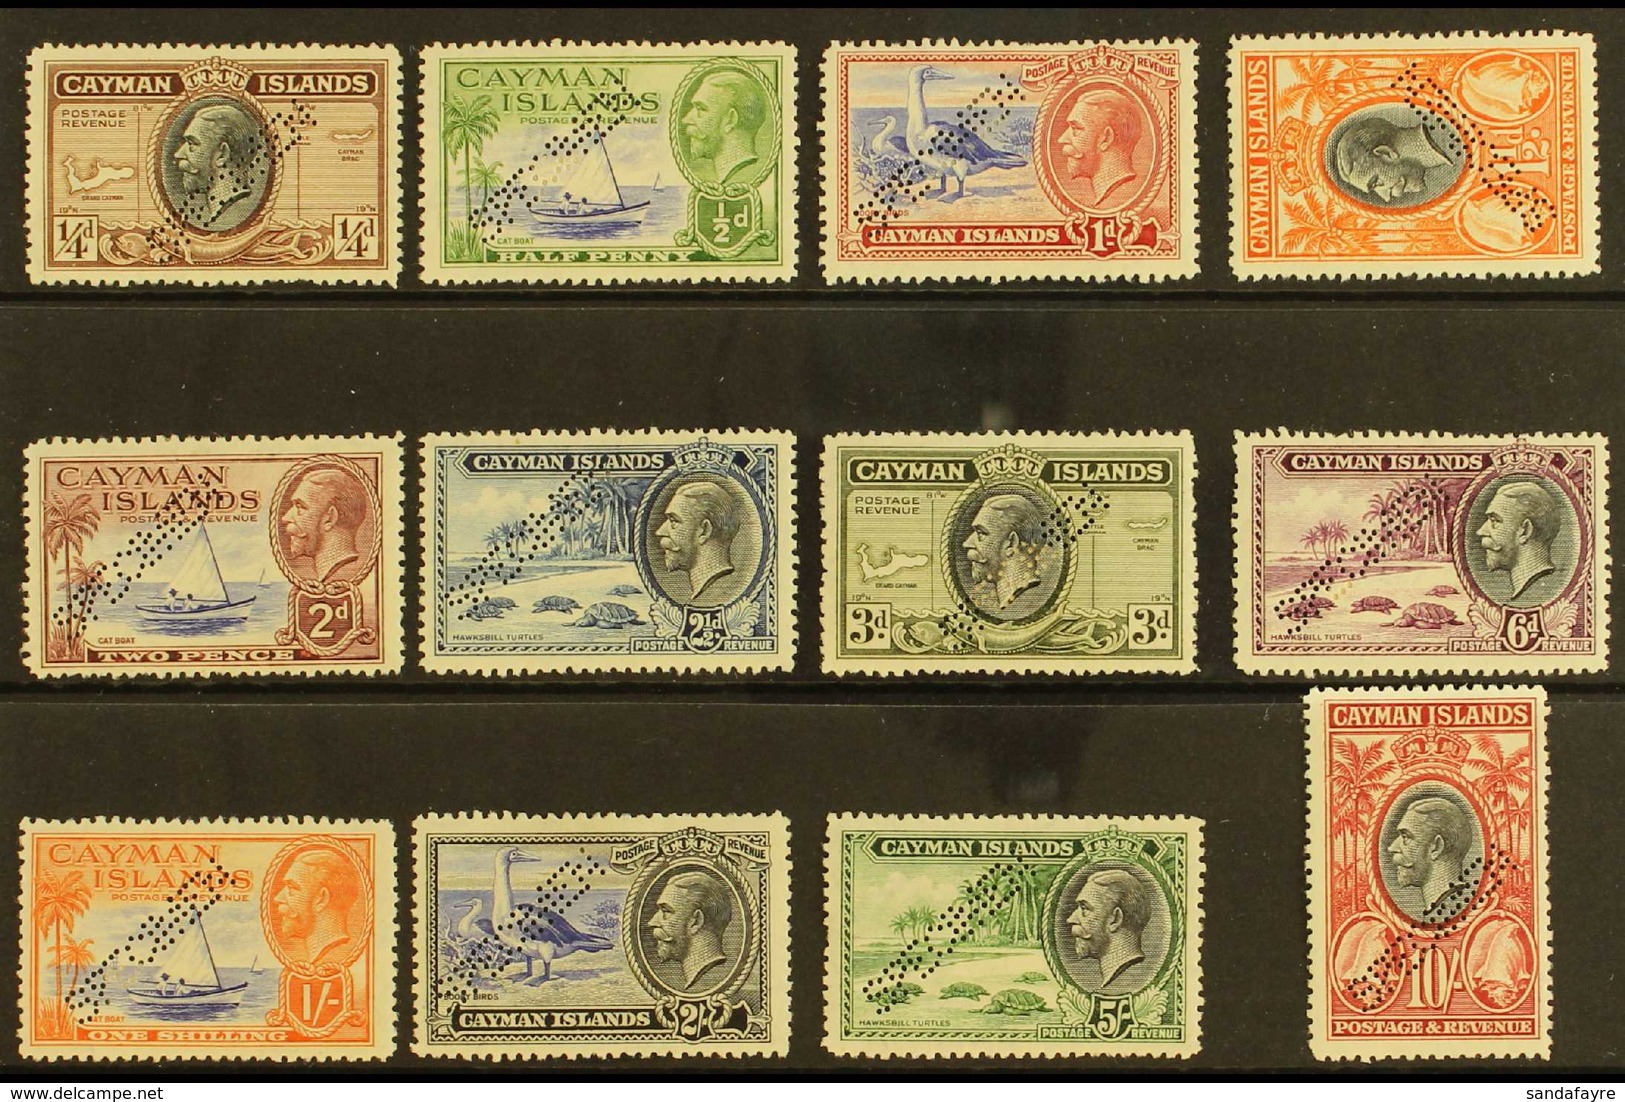 1935 Pictorial Definitives Complete Set With "SPECIMEN" Perfin, SG 96s/107s, ½d Value With Small Thin, Otherwise Fine Mi - Iles Caïmans